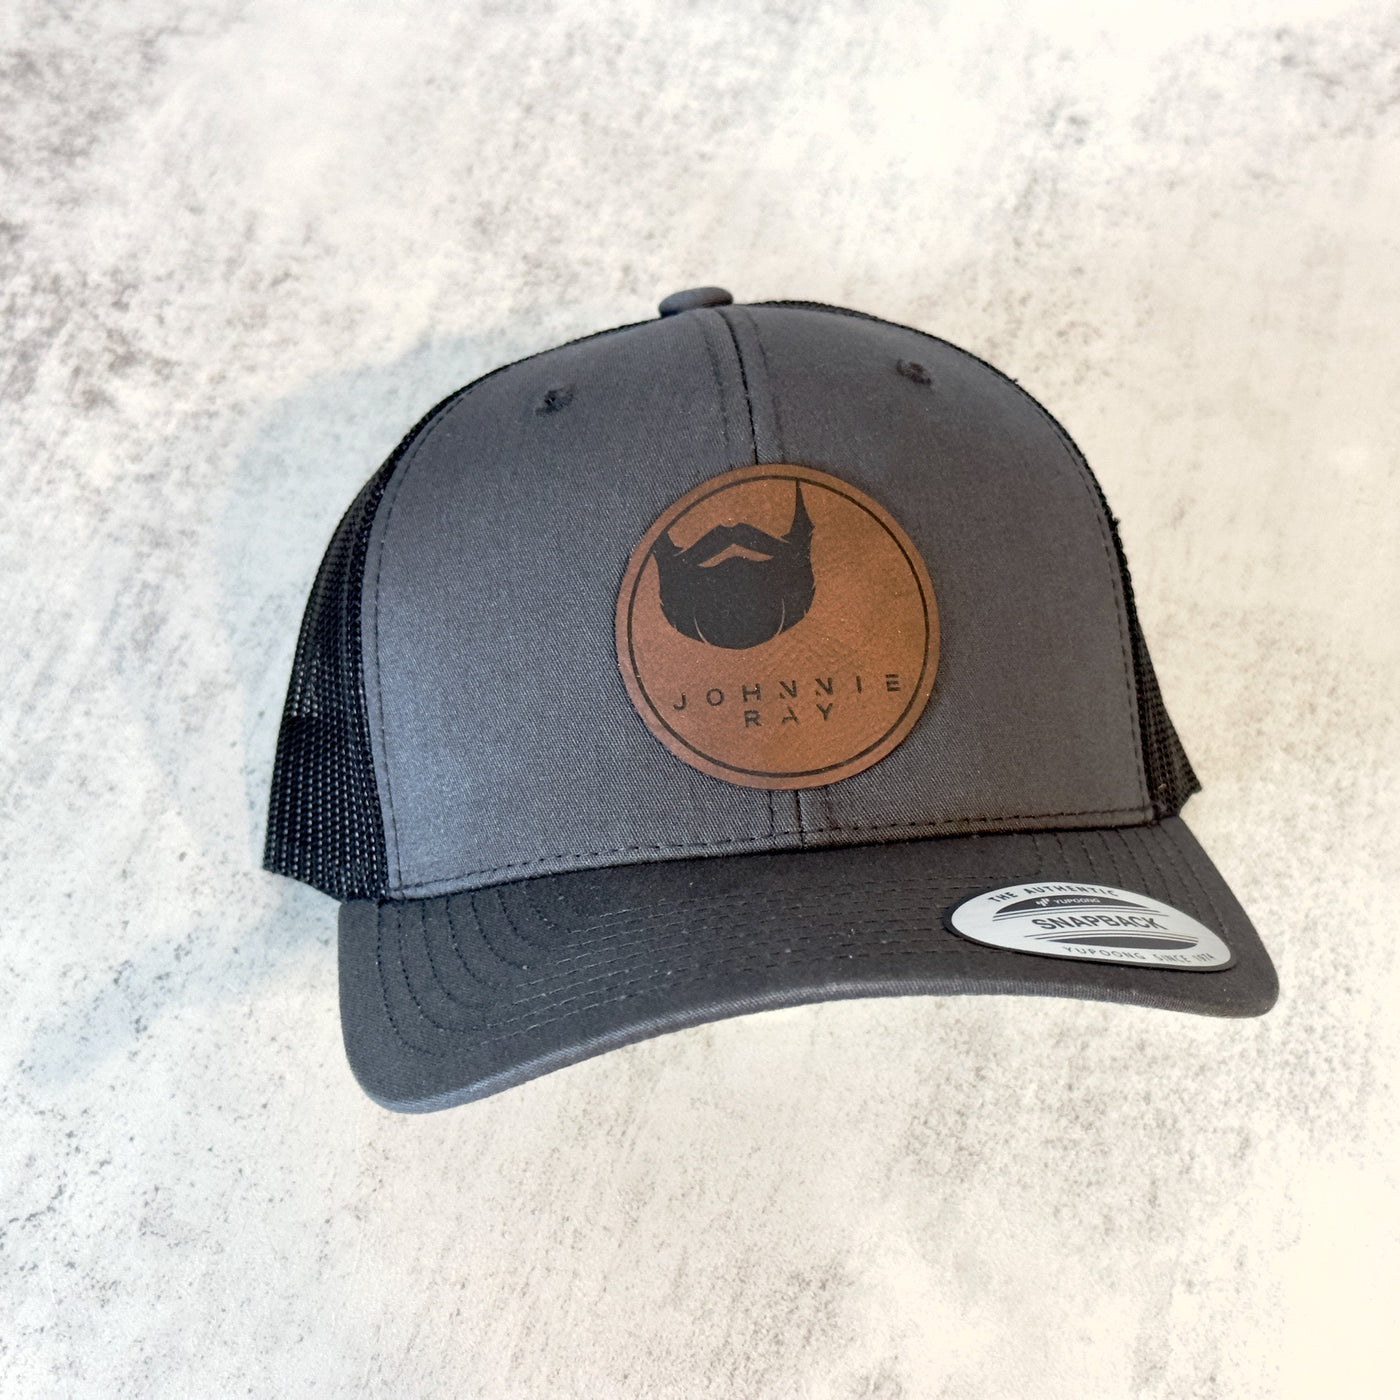 Dark Grey Johnnie Ray hat with round brown leather patch with Johnnie Ray logo.